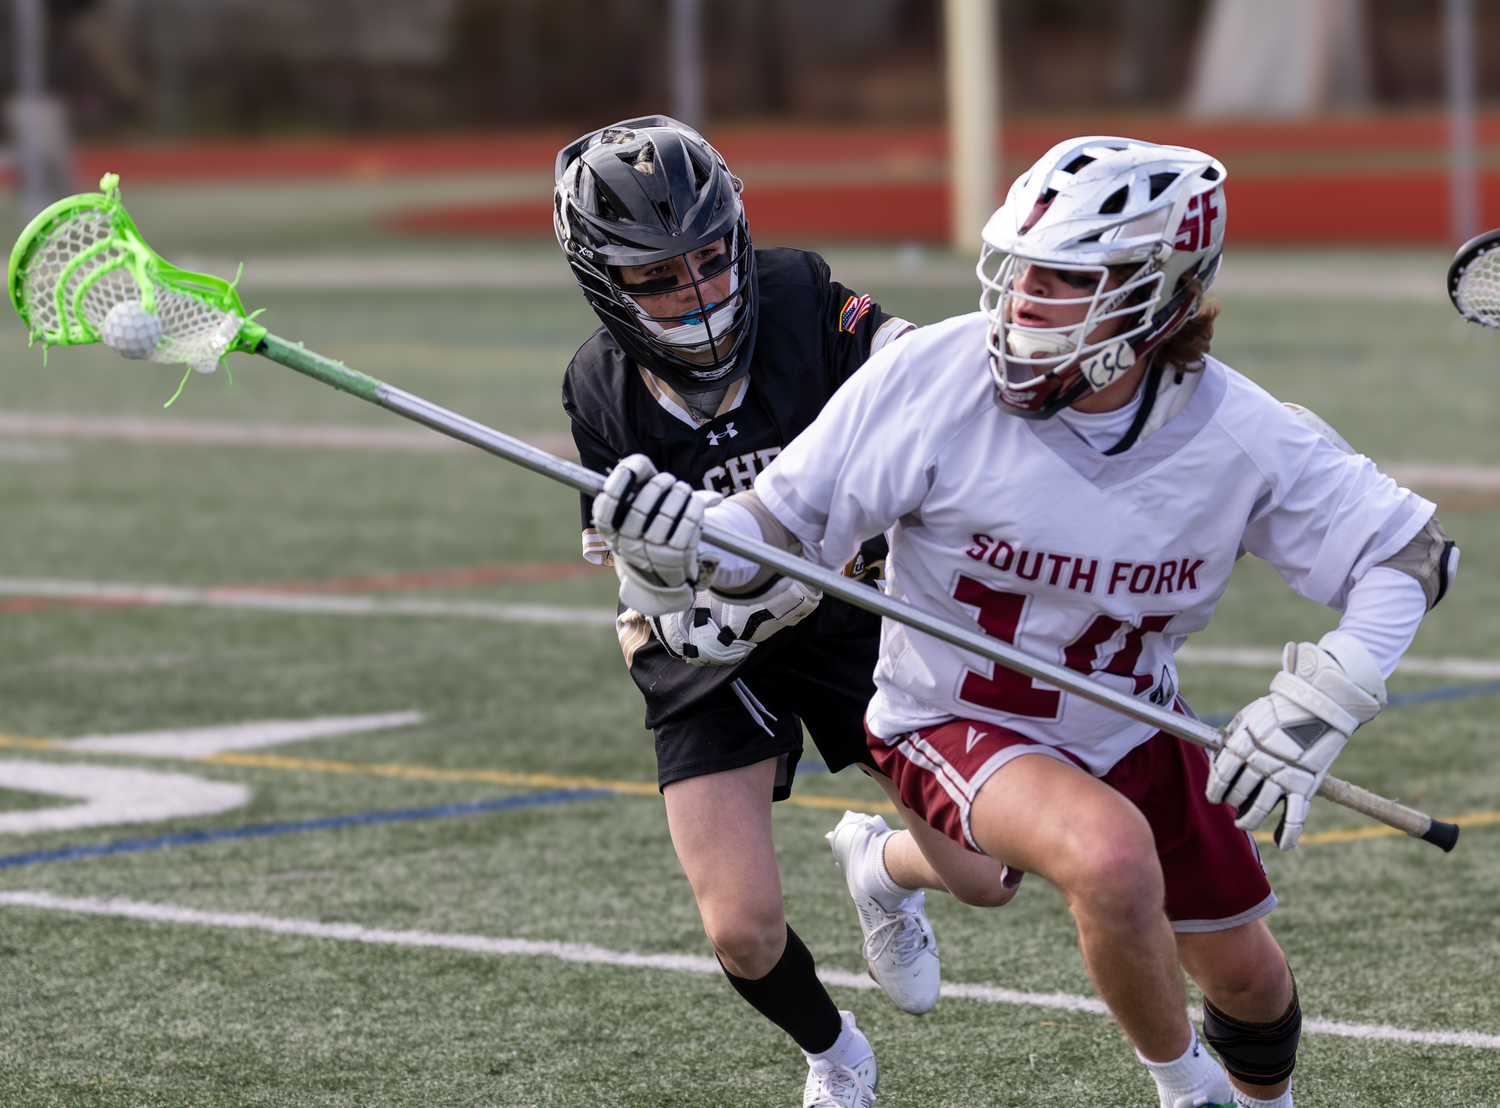 South Fork's Luke Castillo picks up a ground ball with a Sachem North player on his back.  RON ESPOSITO